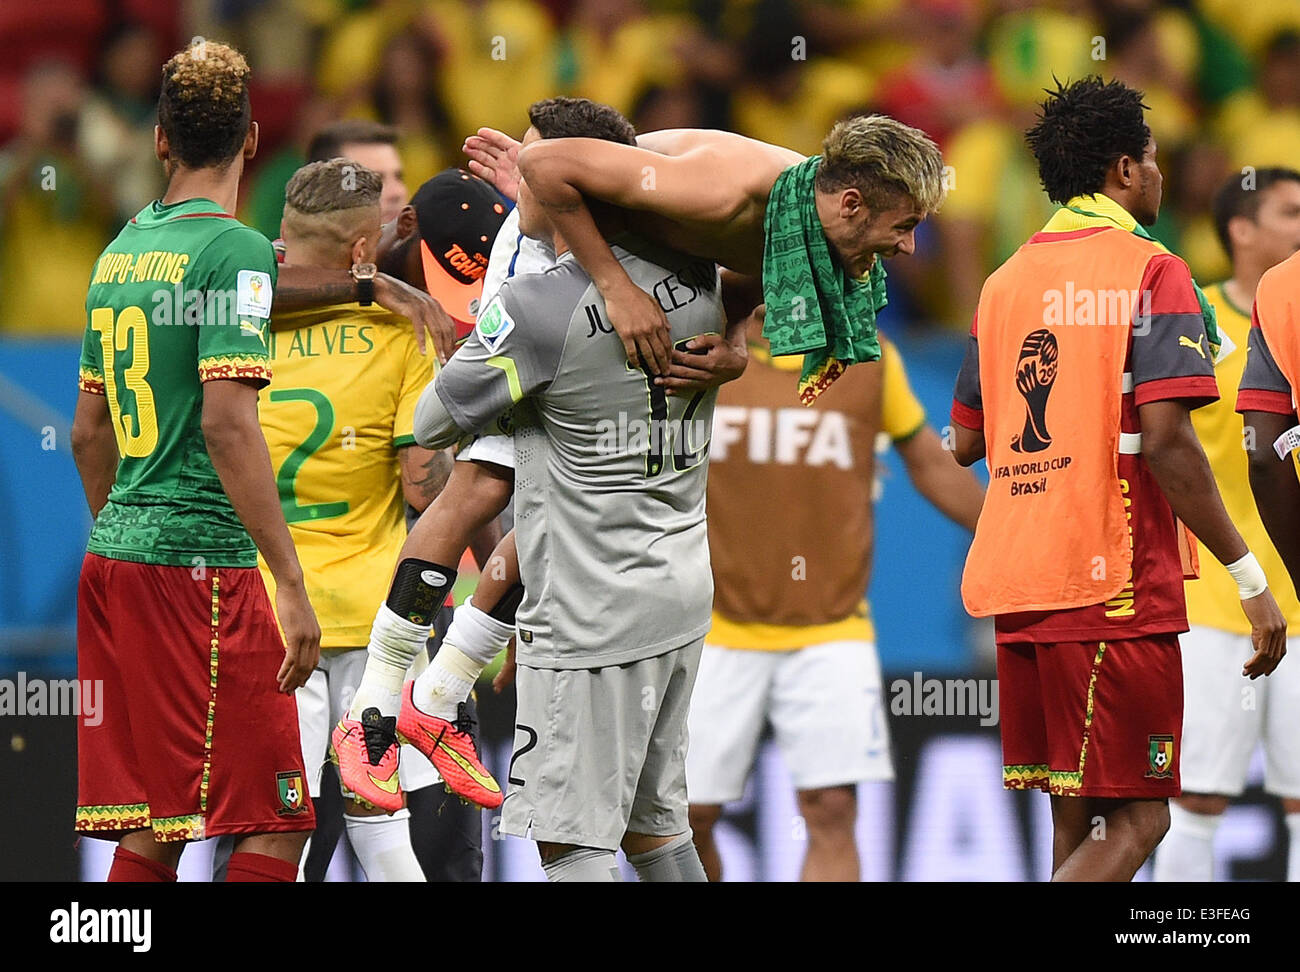 Brasilia, Brazil. 23rd June, 2014. Brazil's Neymar celebrates with goal keeper Julio Cesar (C) next to Cameroon's Eric Choupo Moting (L) after the FIFA World Cup 2014 group A preliminary round match between Cameroon and Brazil at the Estadio Nacional in Brasilia, Brazil, 23 June 2014. Photo: Marius Becker/dpa/Alamy Live News Stock Photo